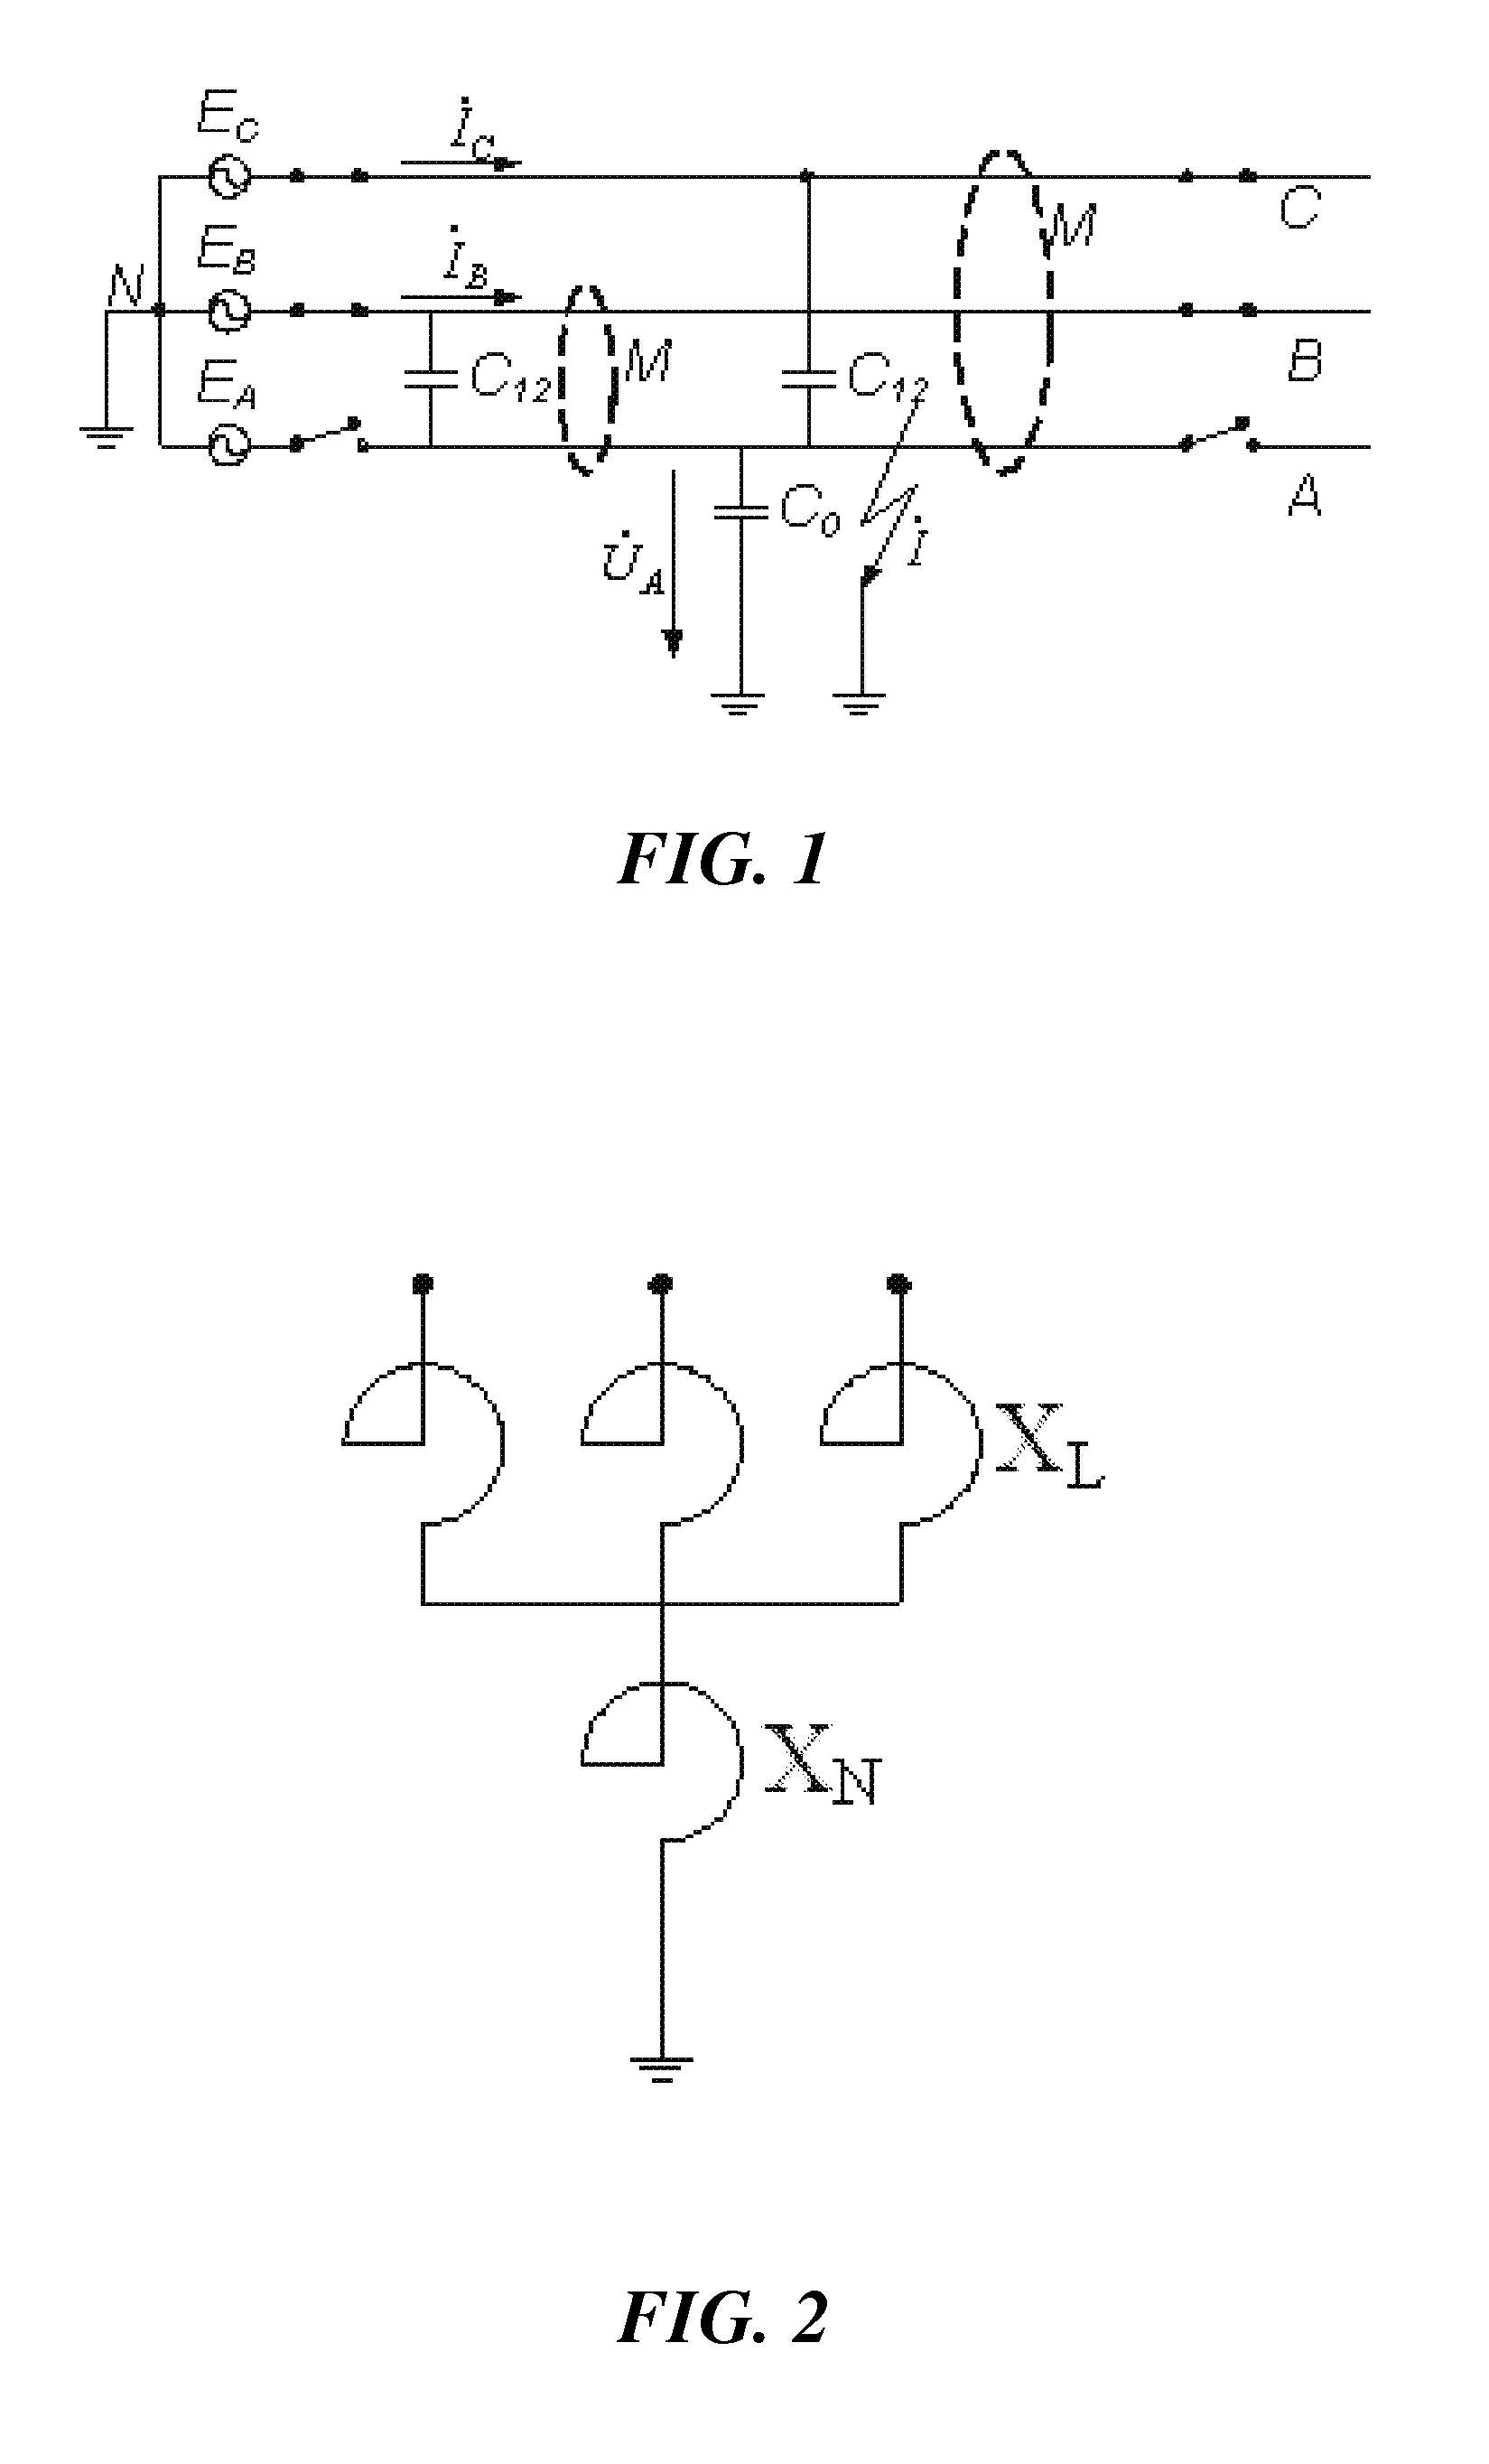 Method and device for limiting secondary arc current of extra-high voltage/ultra-high voltage double circuit lines on the same tower